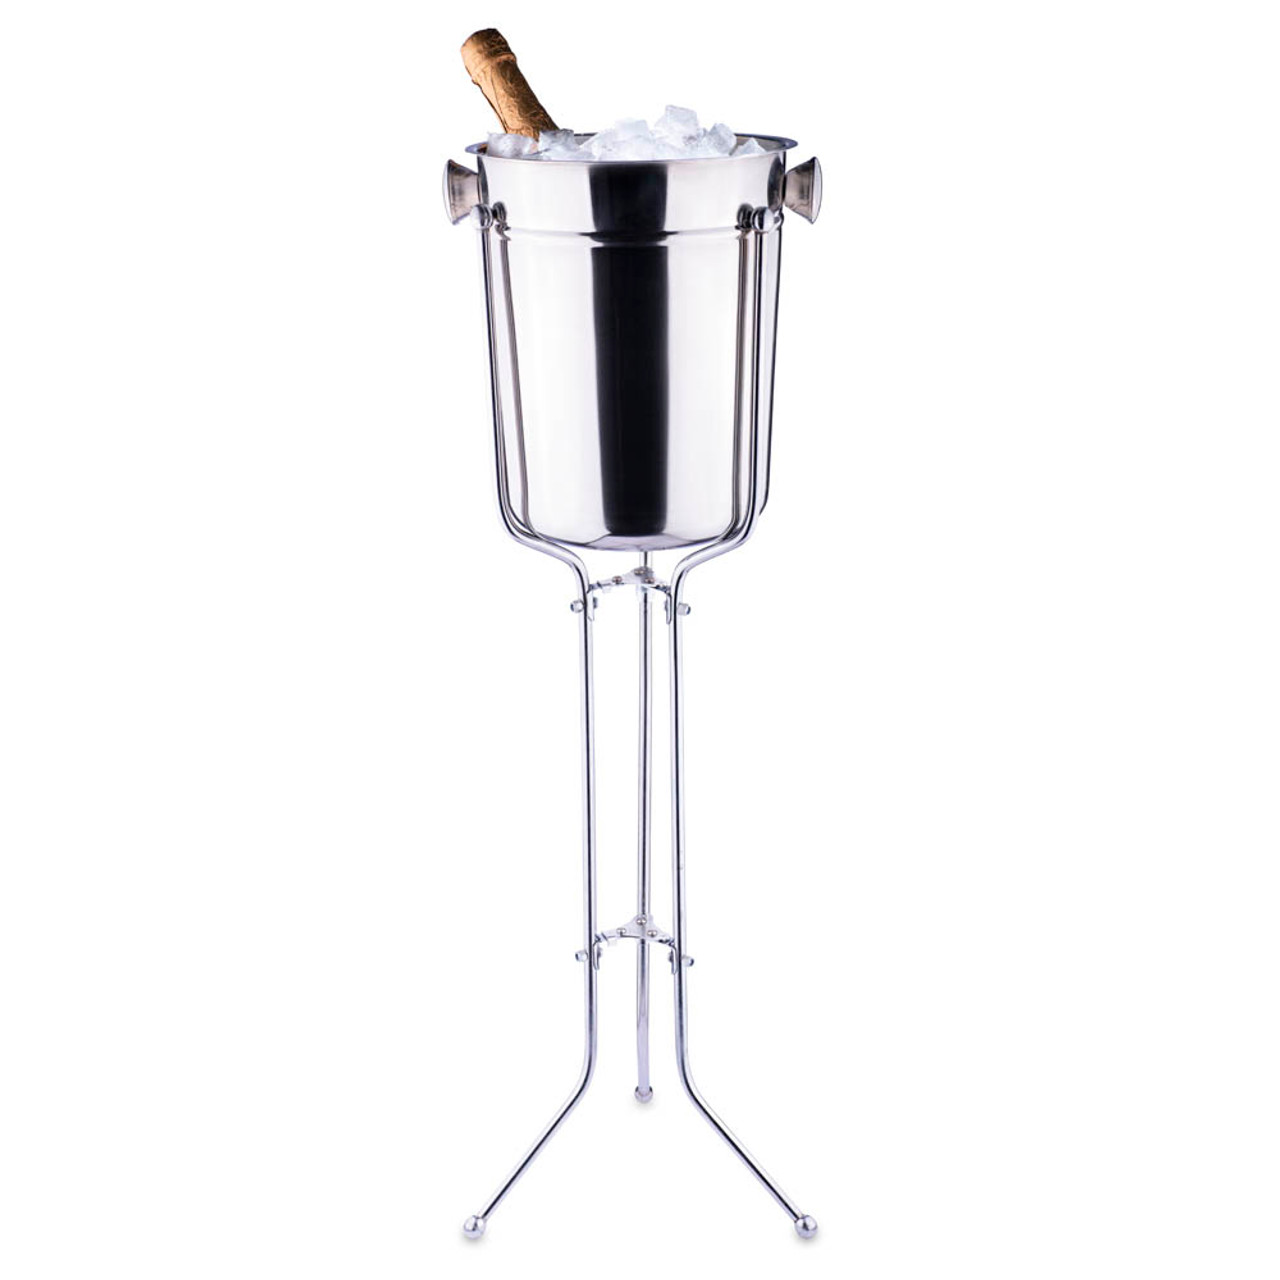 https://cdn11.bigcommerce.com/s-cznxq08r7/images/stencil/1280x1280/products/410/8469/roy-wb-1b-1s-champagne-and-wine-bucket-with-folding-stand-2__49344.1590772004.jpg?c=1